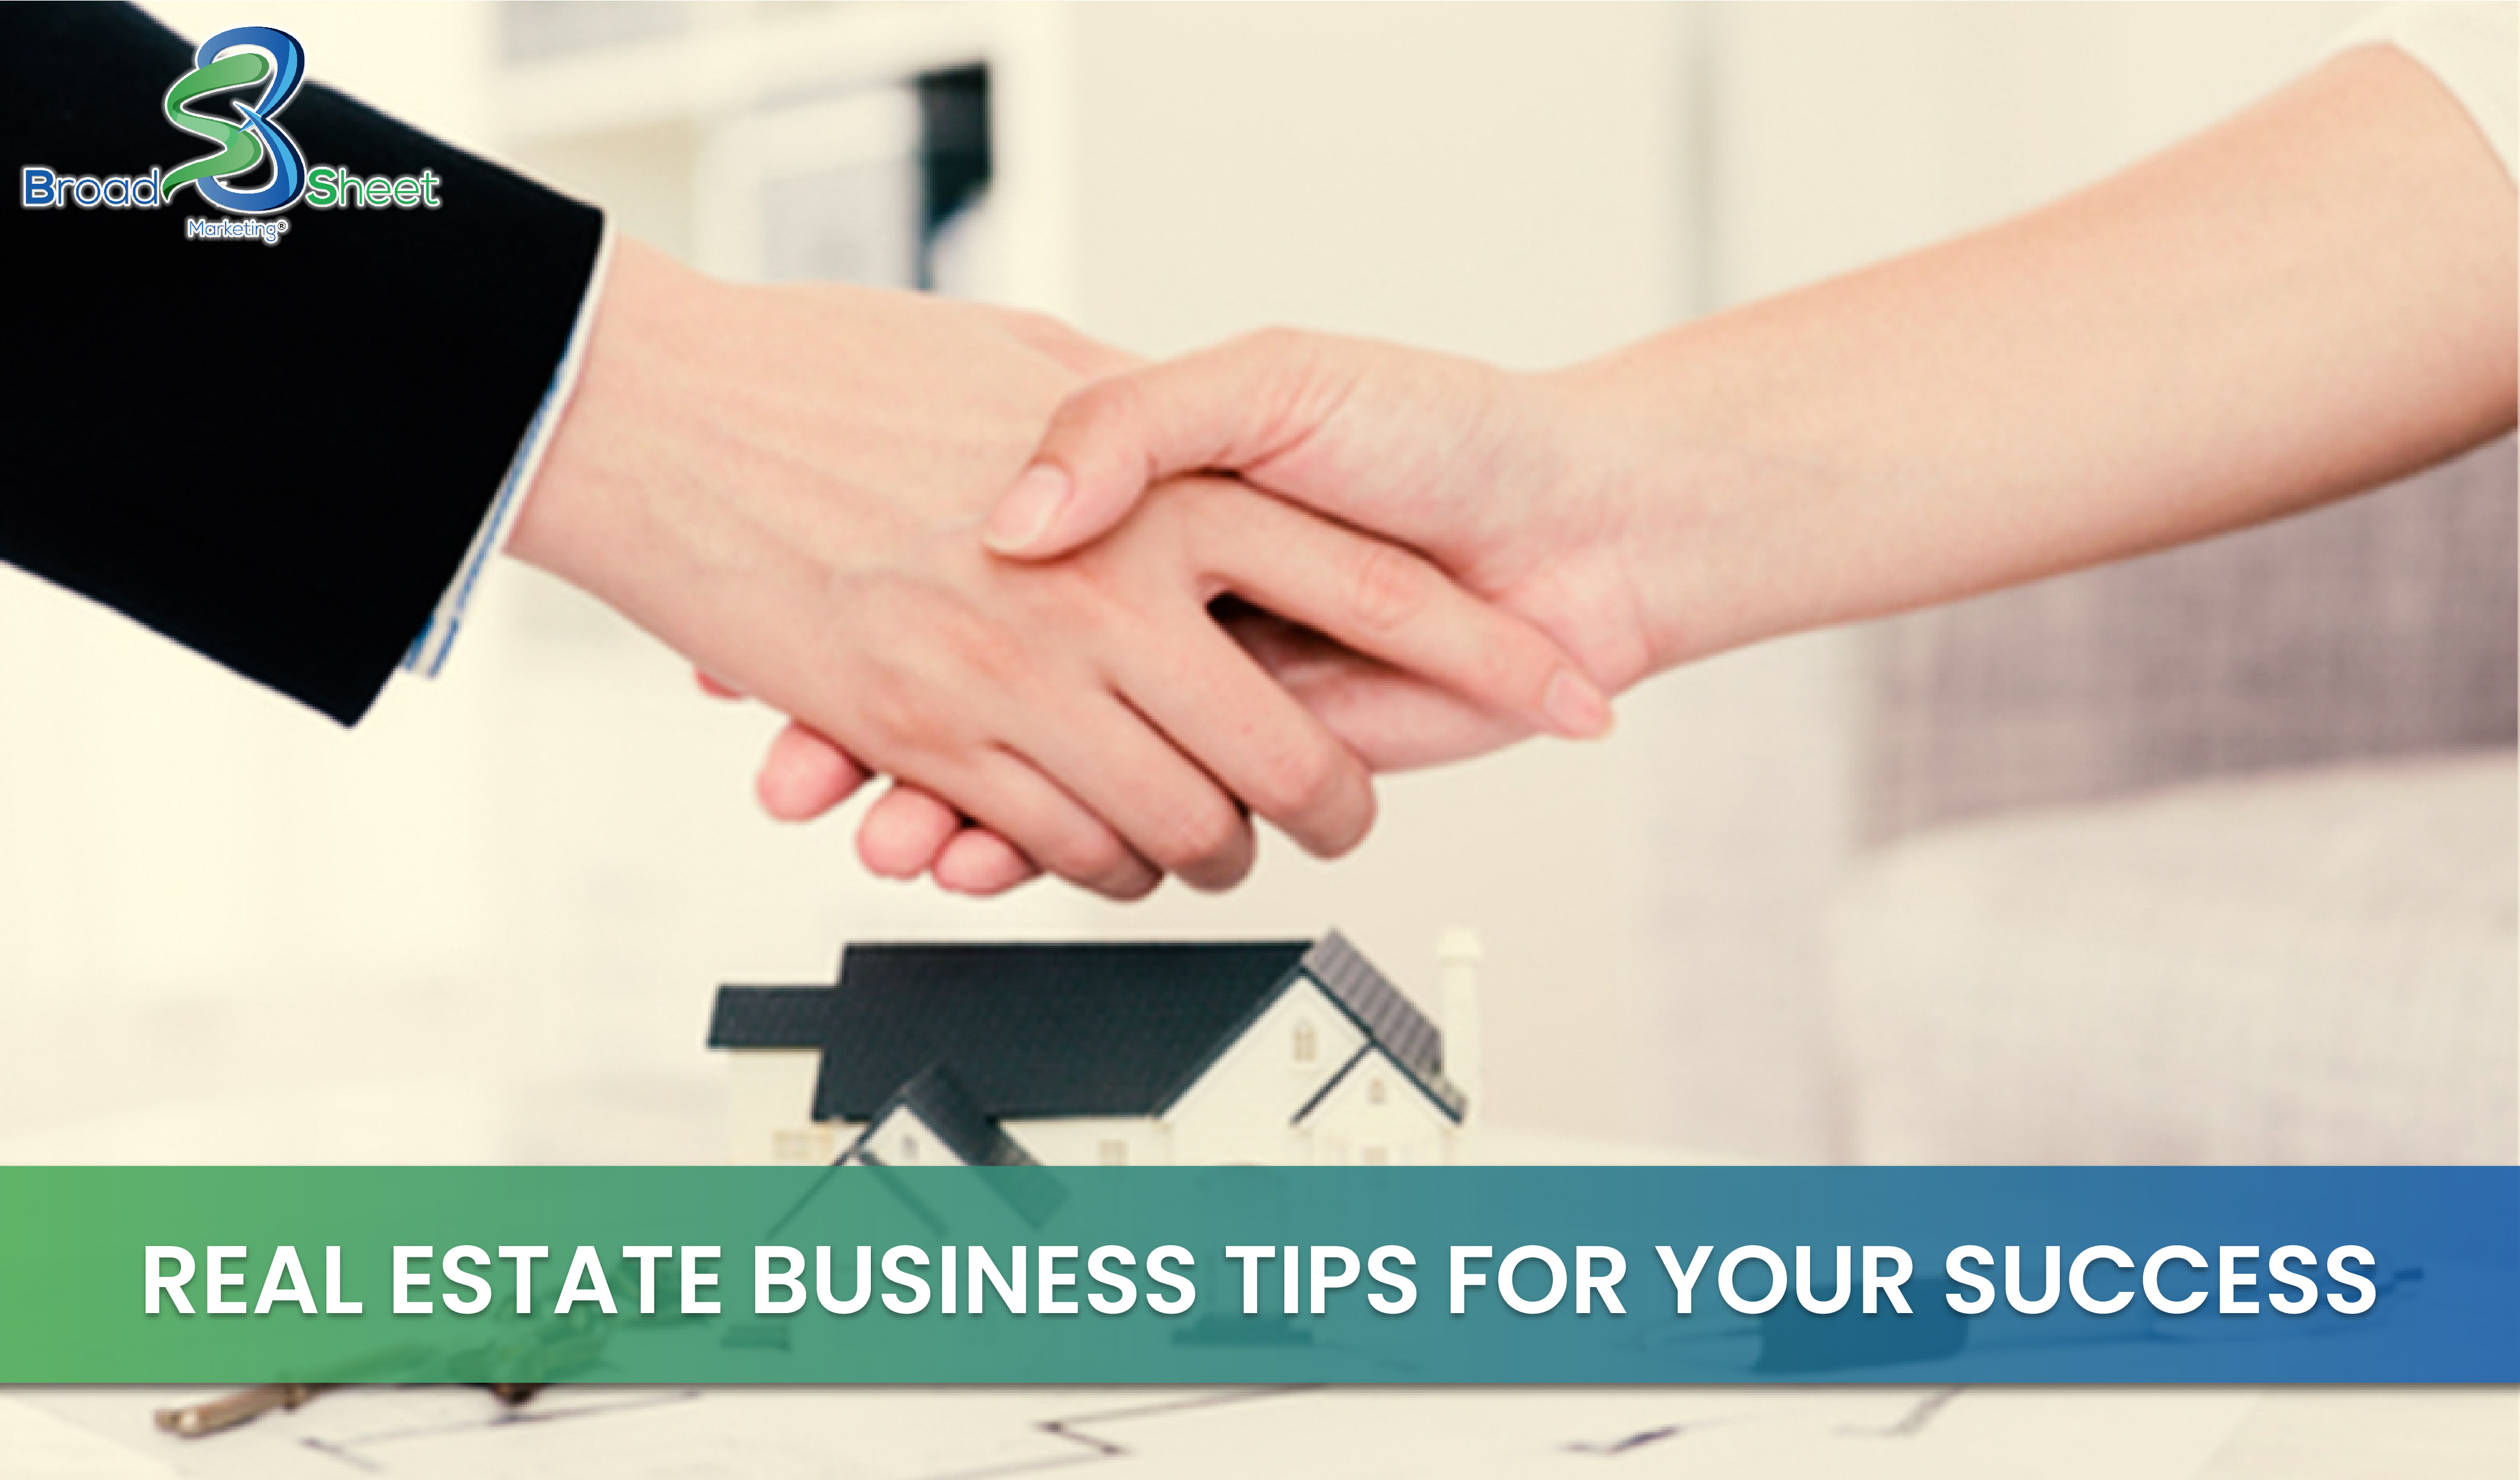 Real estate business tips for your success